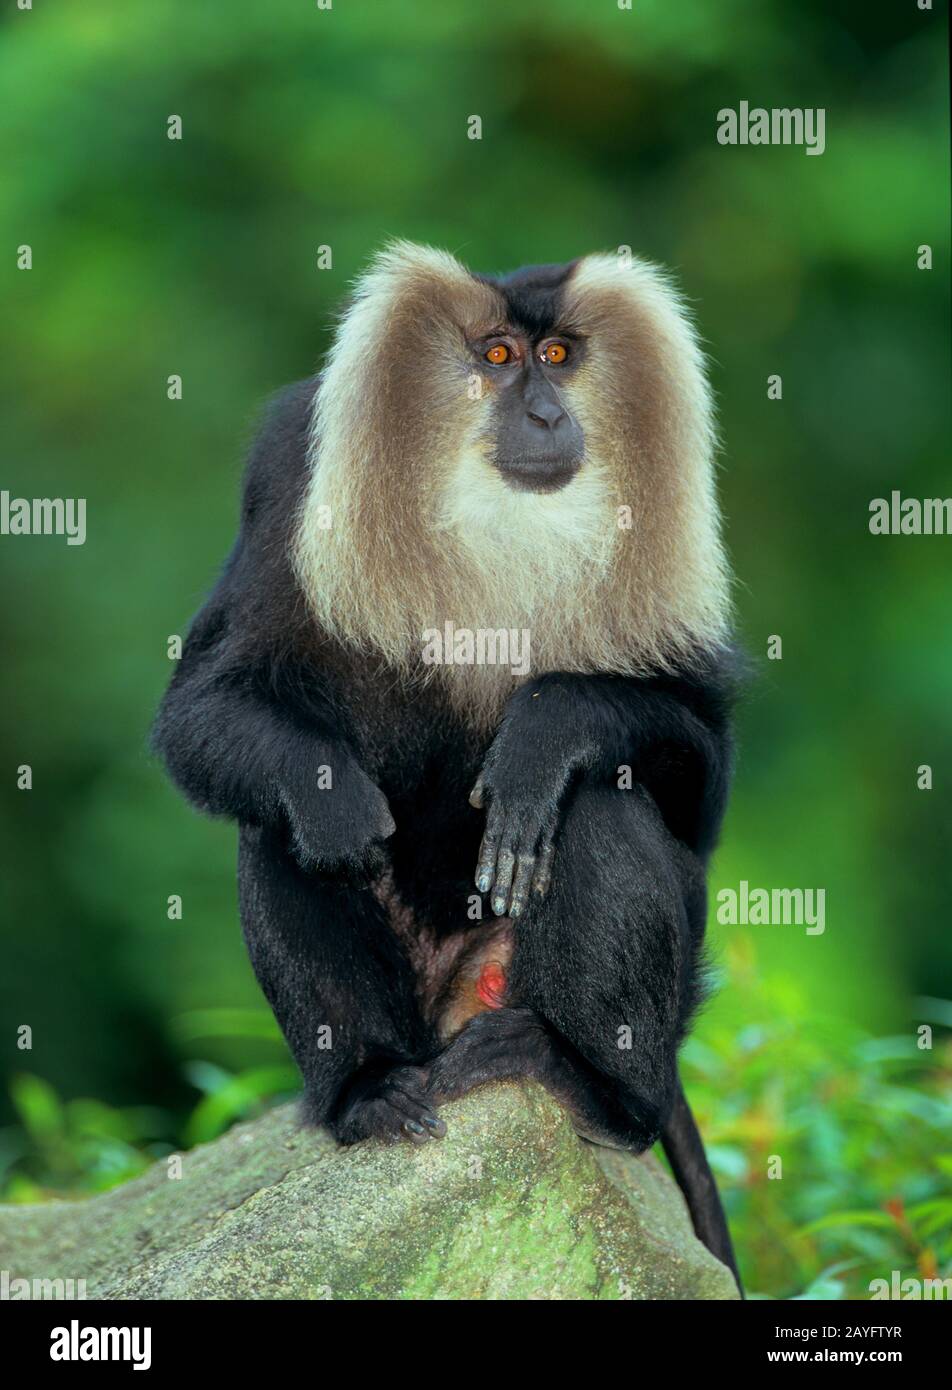 liontail macaque, lion-tailed macaque (Macaca silenus), sitting on a rock Stock Photo